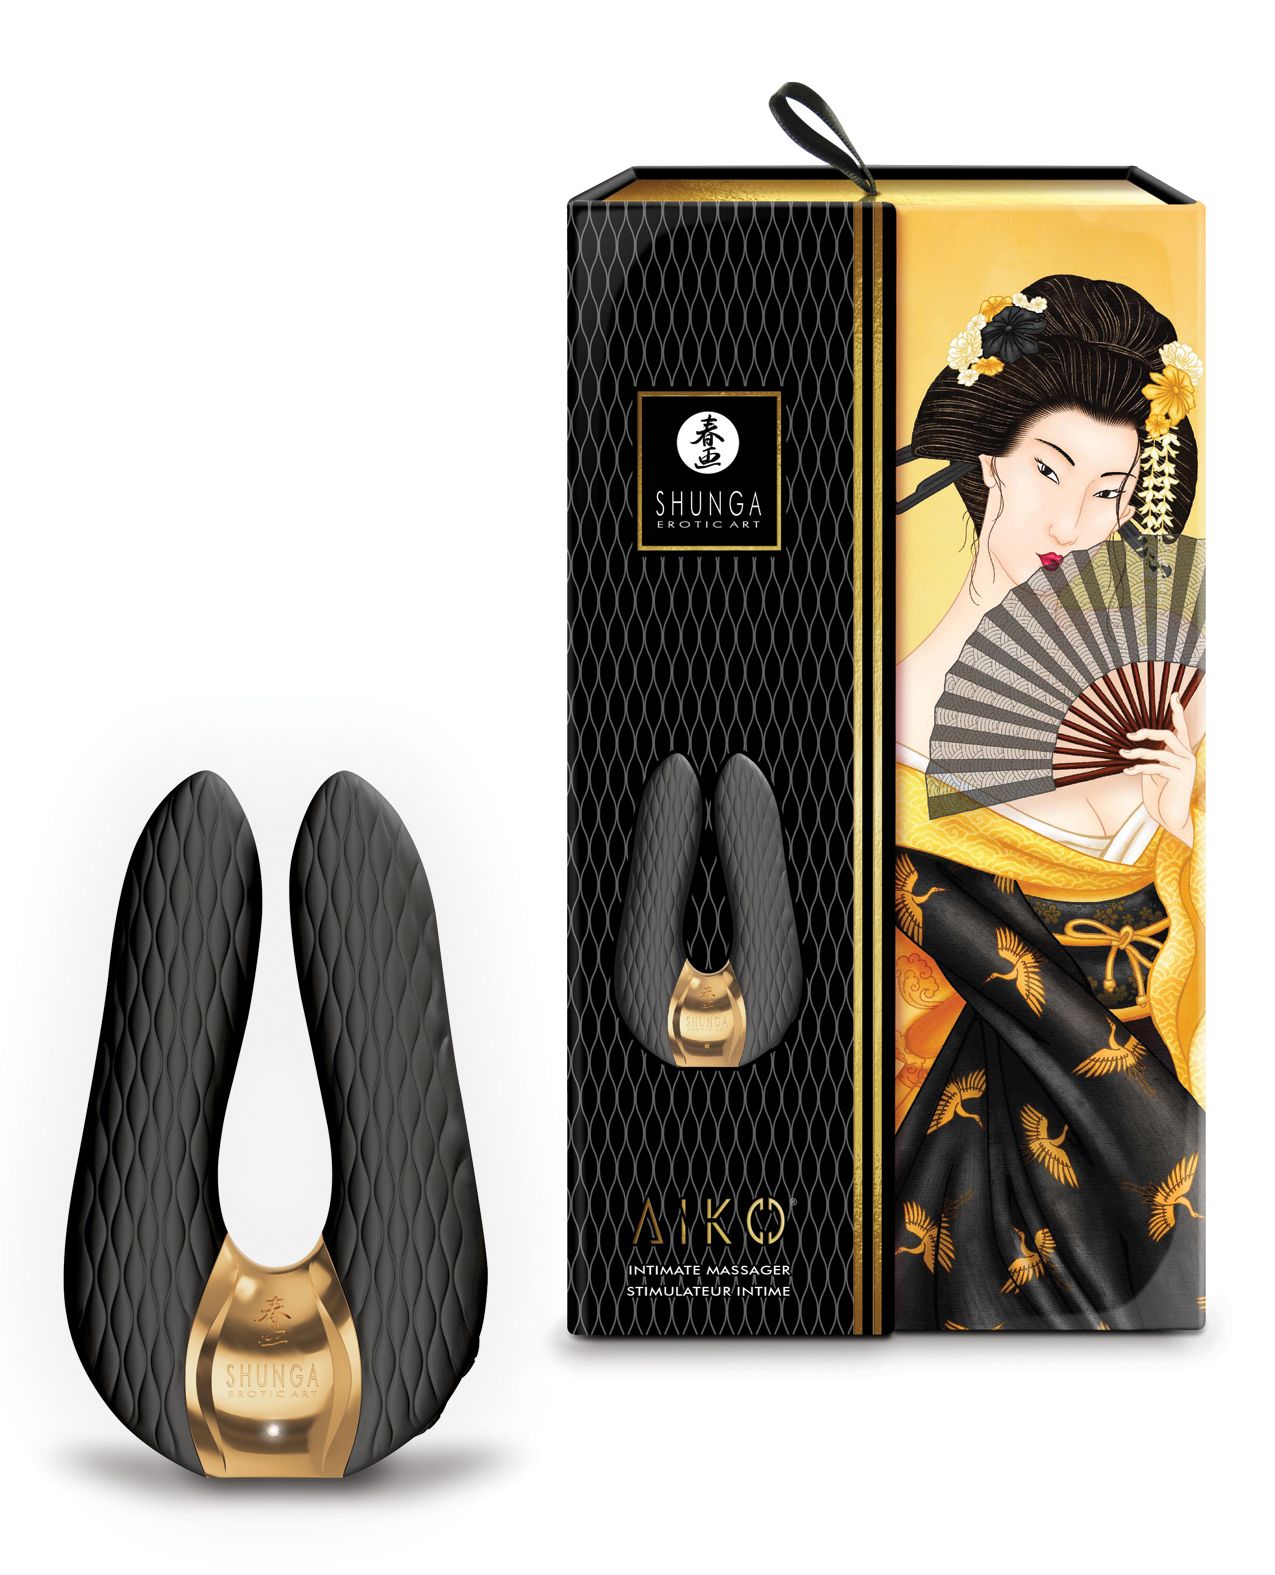 Shunga Aiko sits next to the package which has a image of the toy and a woman using a hand fan